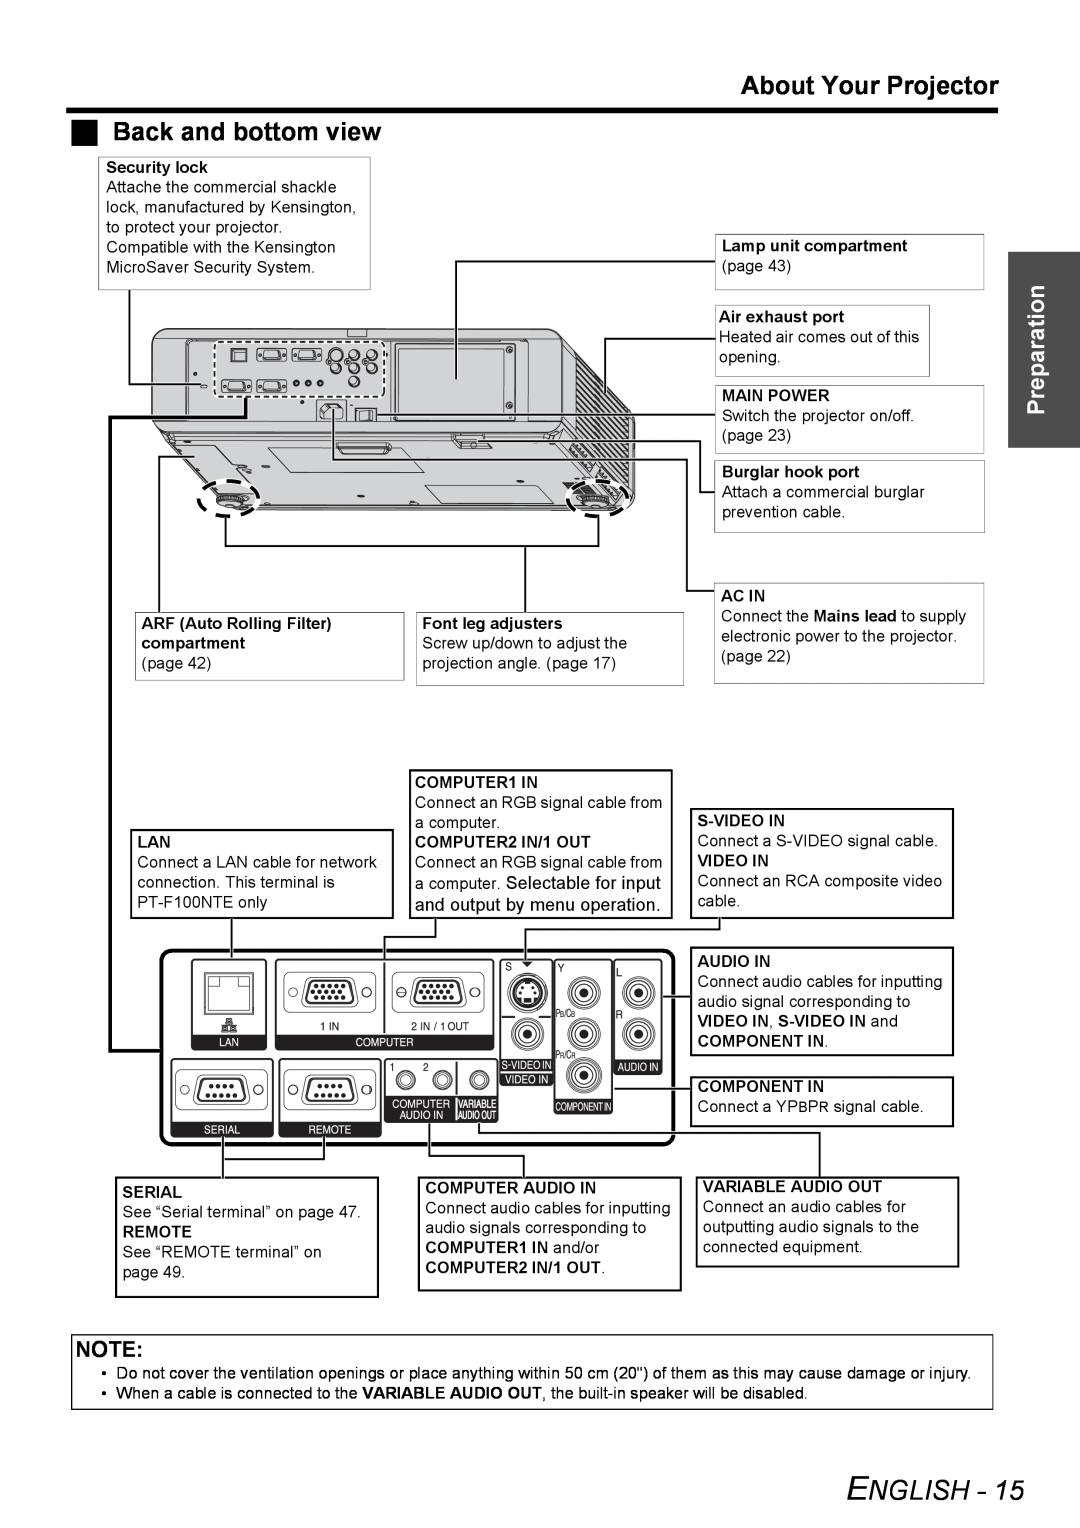 Philips PT-F100NTE manual About Your Projector Back and bottom view, English, Preparation, a computer. Selectable for input 